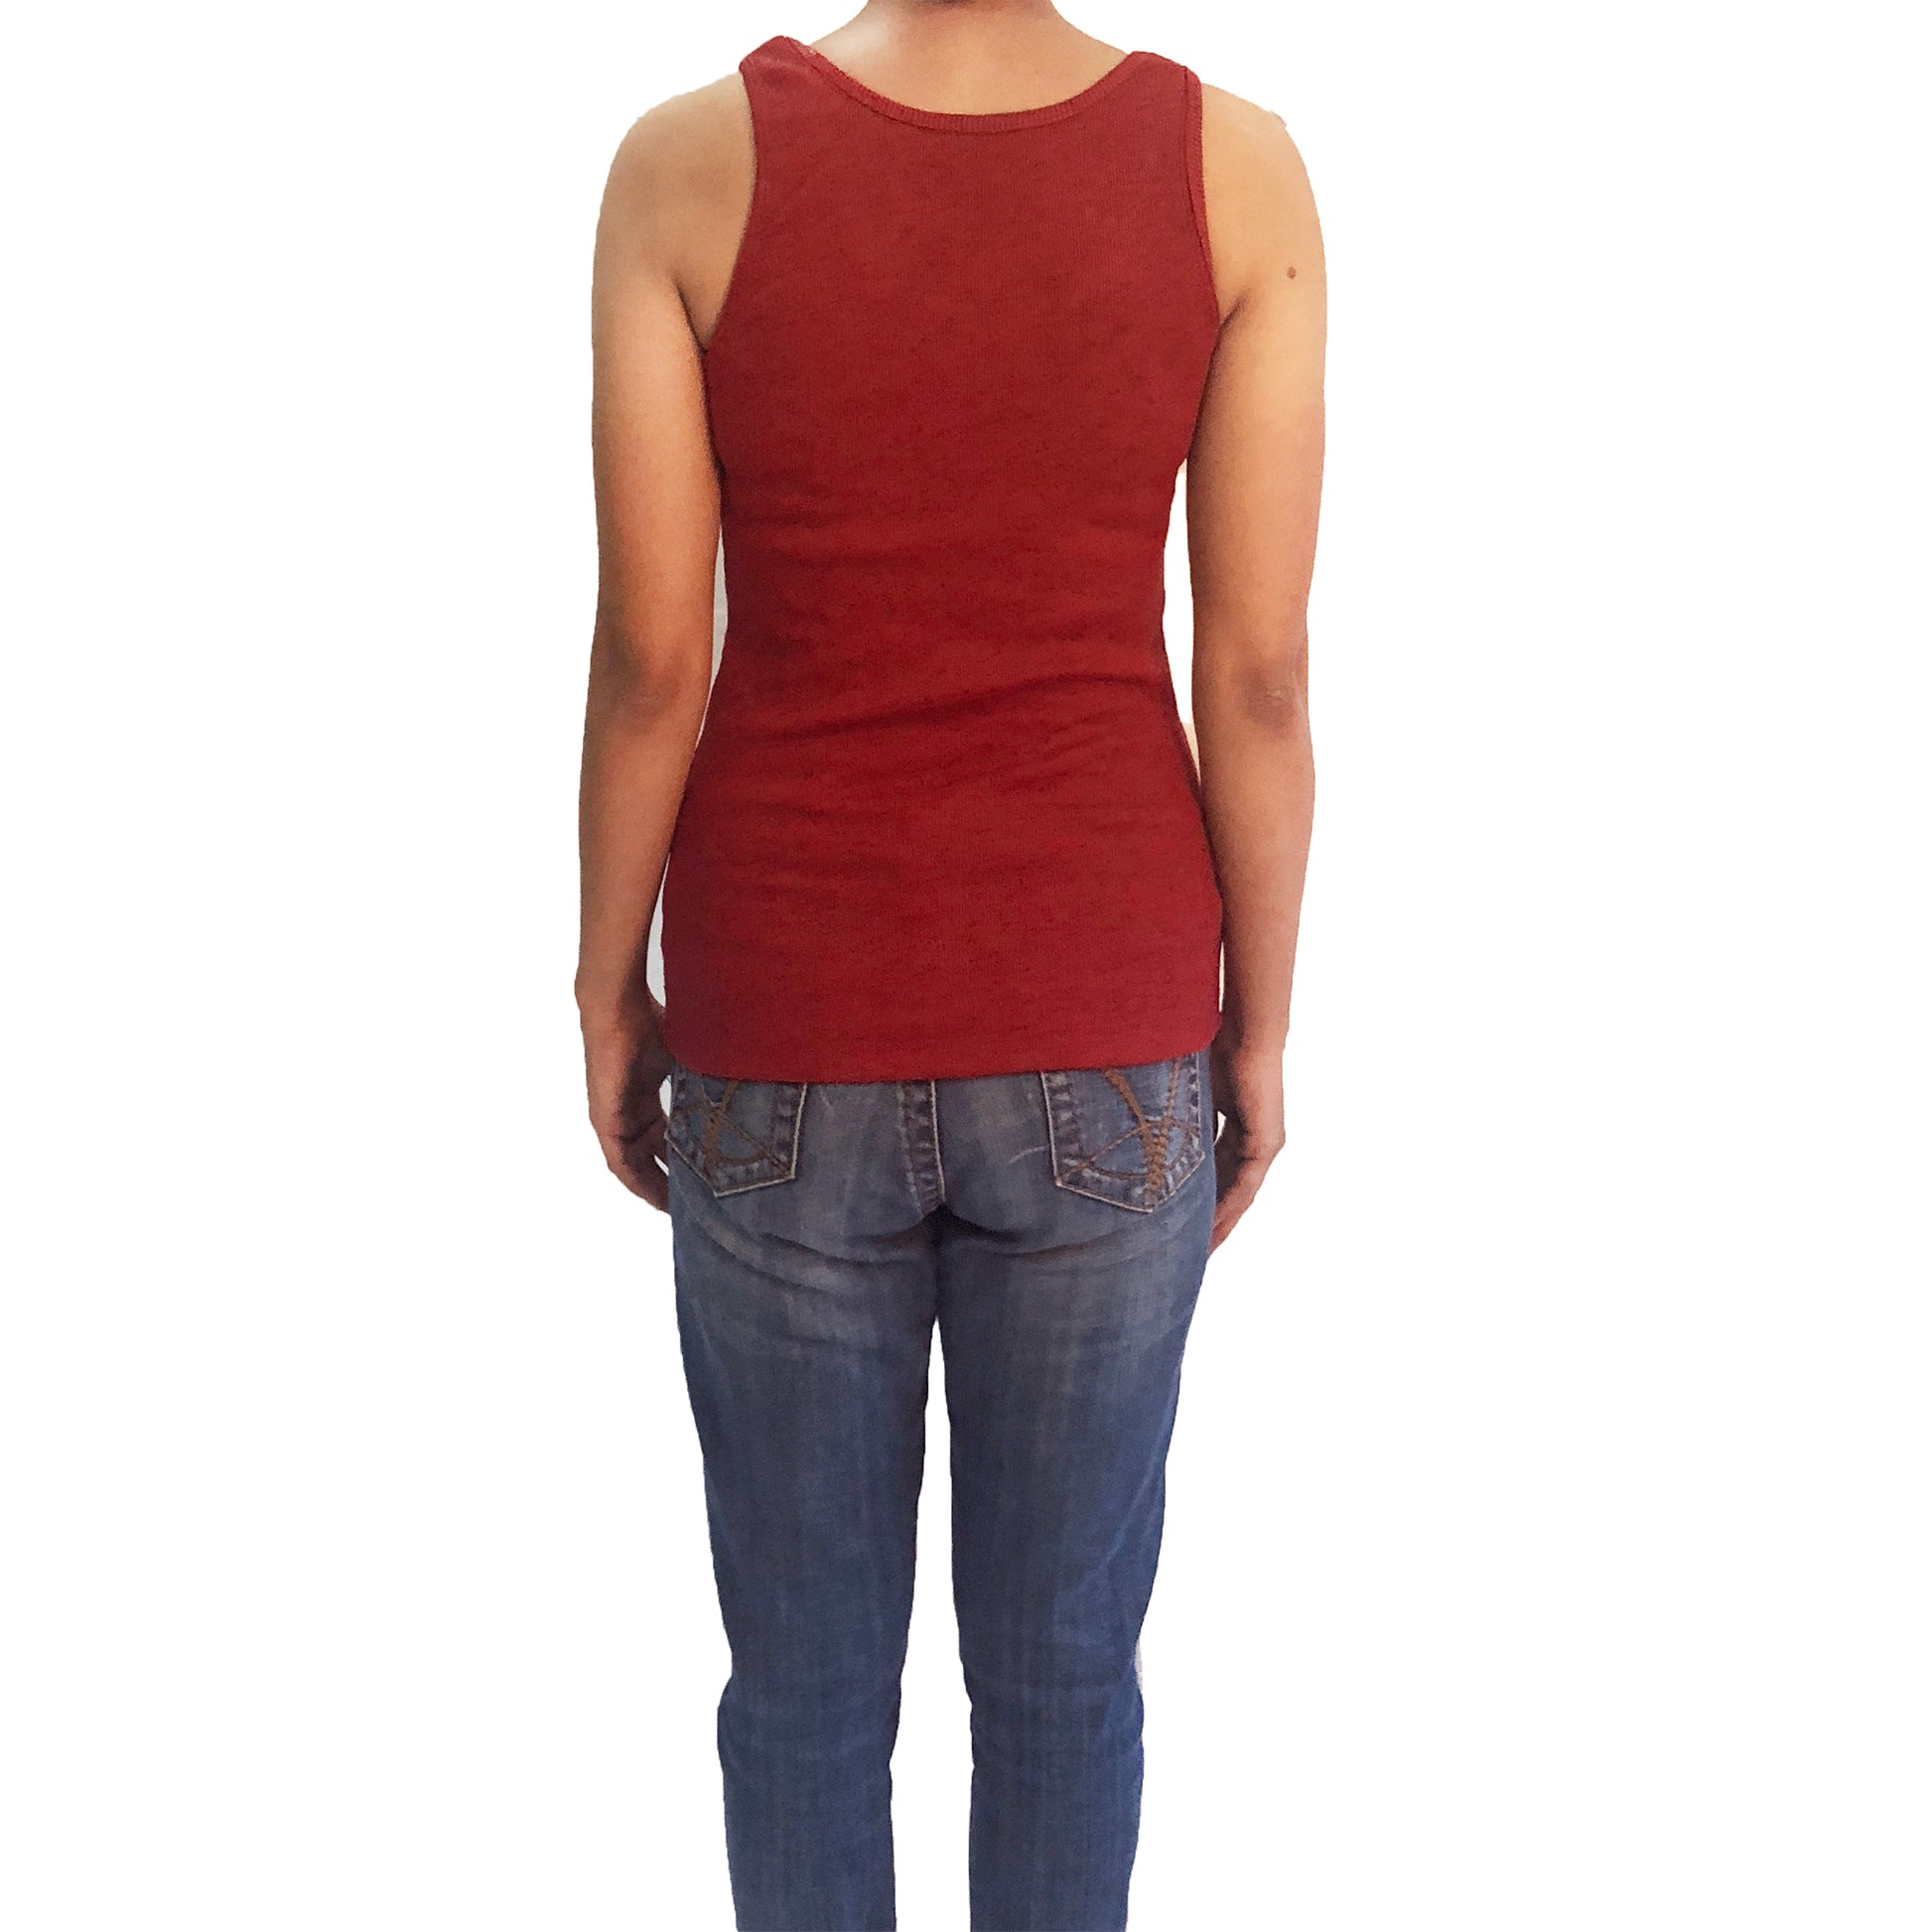 gym-wear-tank-top-for-women-online-india